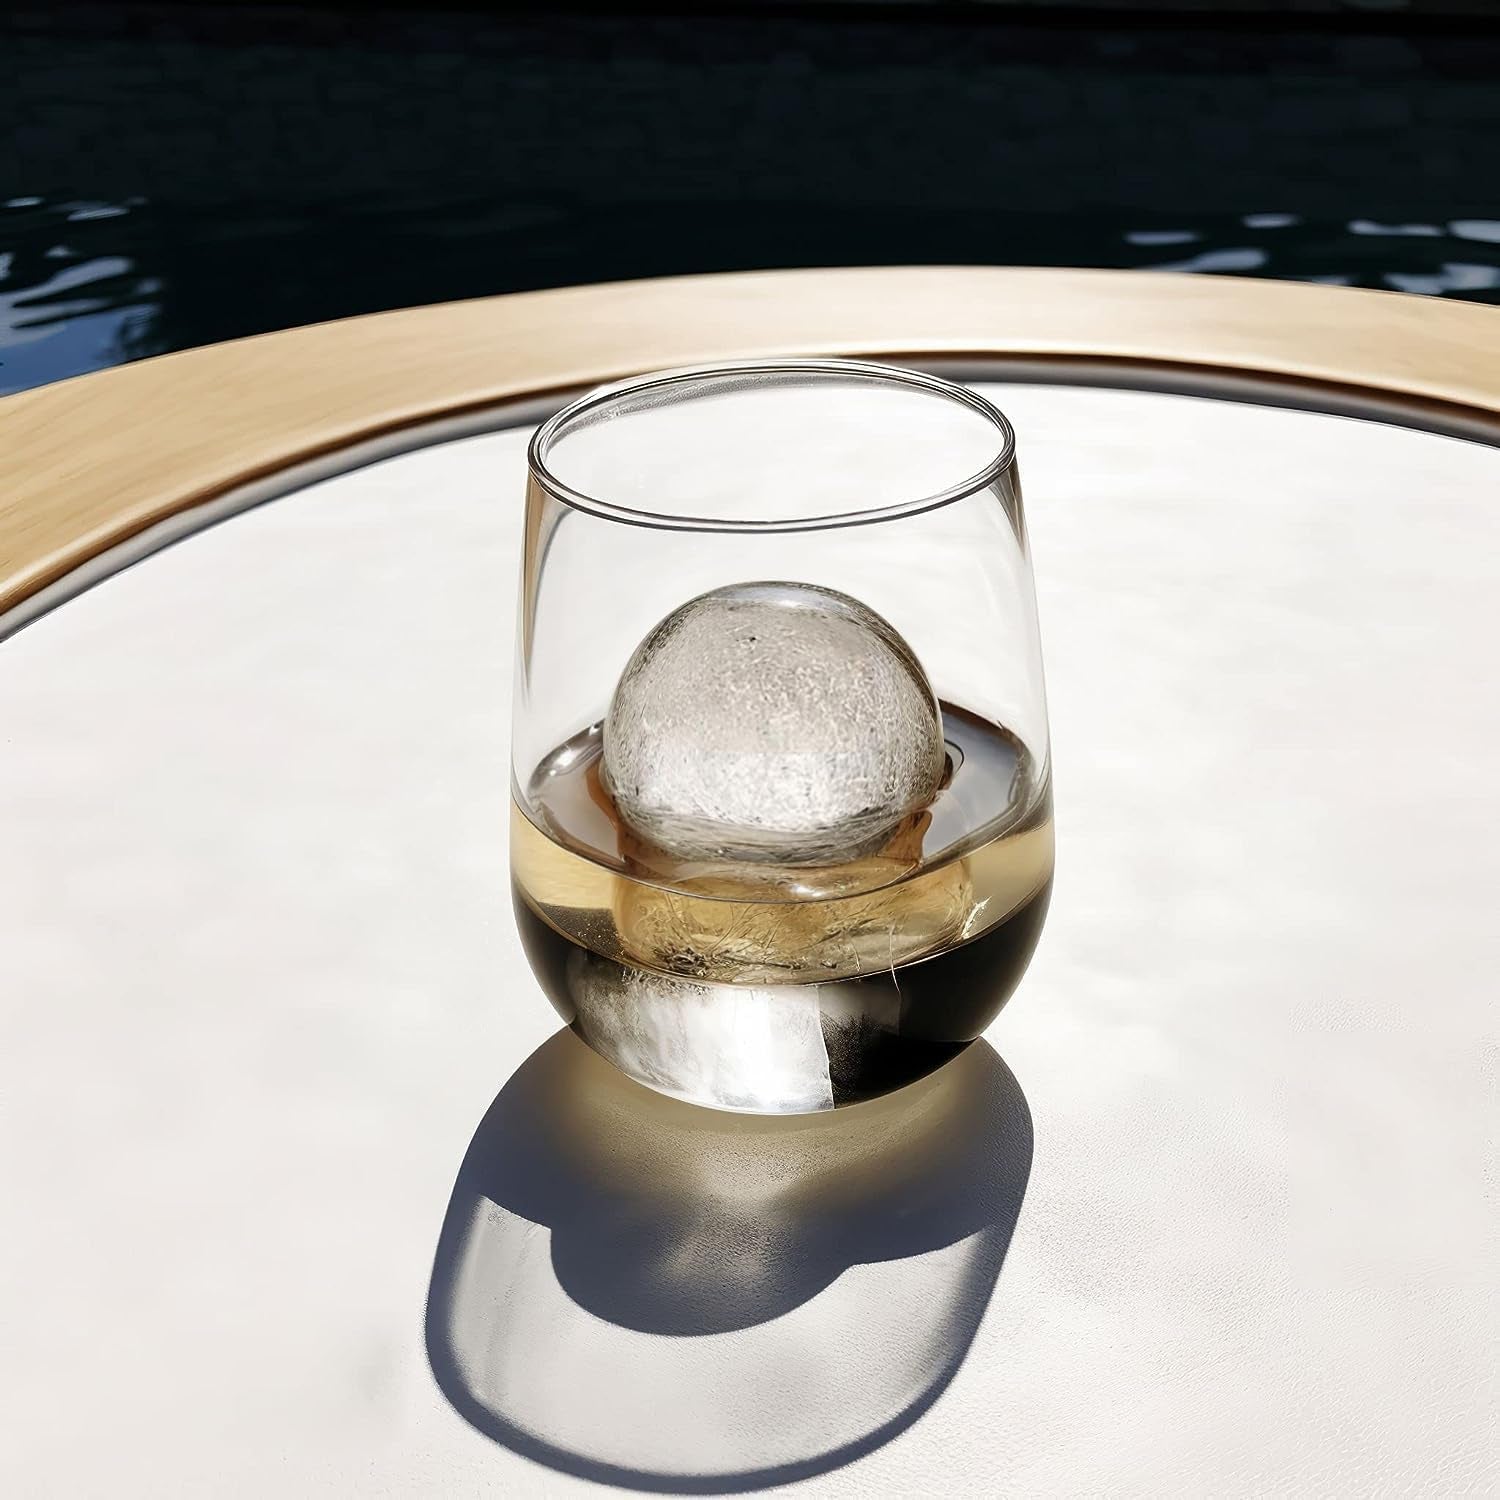 Glacio Ice Ball Maker Mold - Durable & Flexible, No Plastic, Large Spheres for Chill-To-Perfection Drinks, Easy Release Ball Ice Cube Mold, Reusable, Eco-Friendly Whiskey Ice Ball Maker